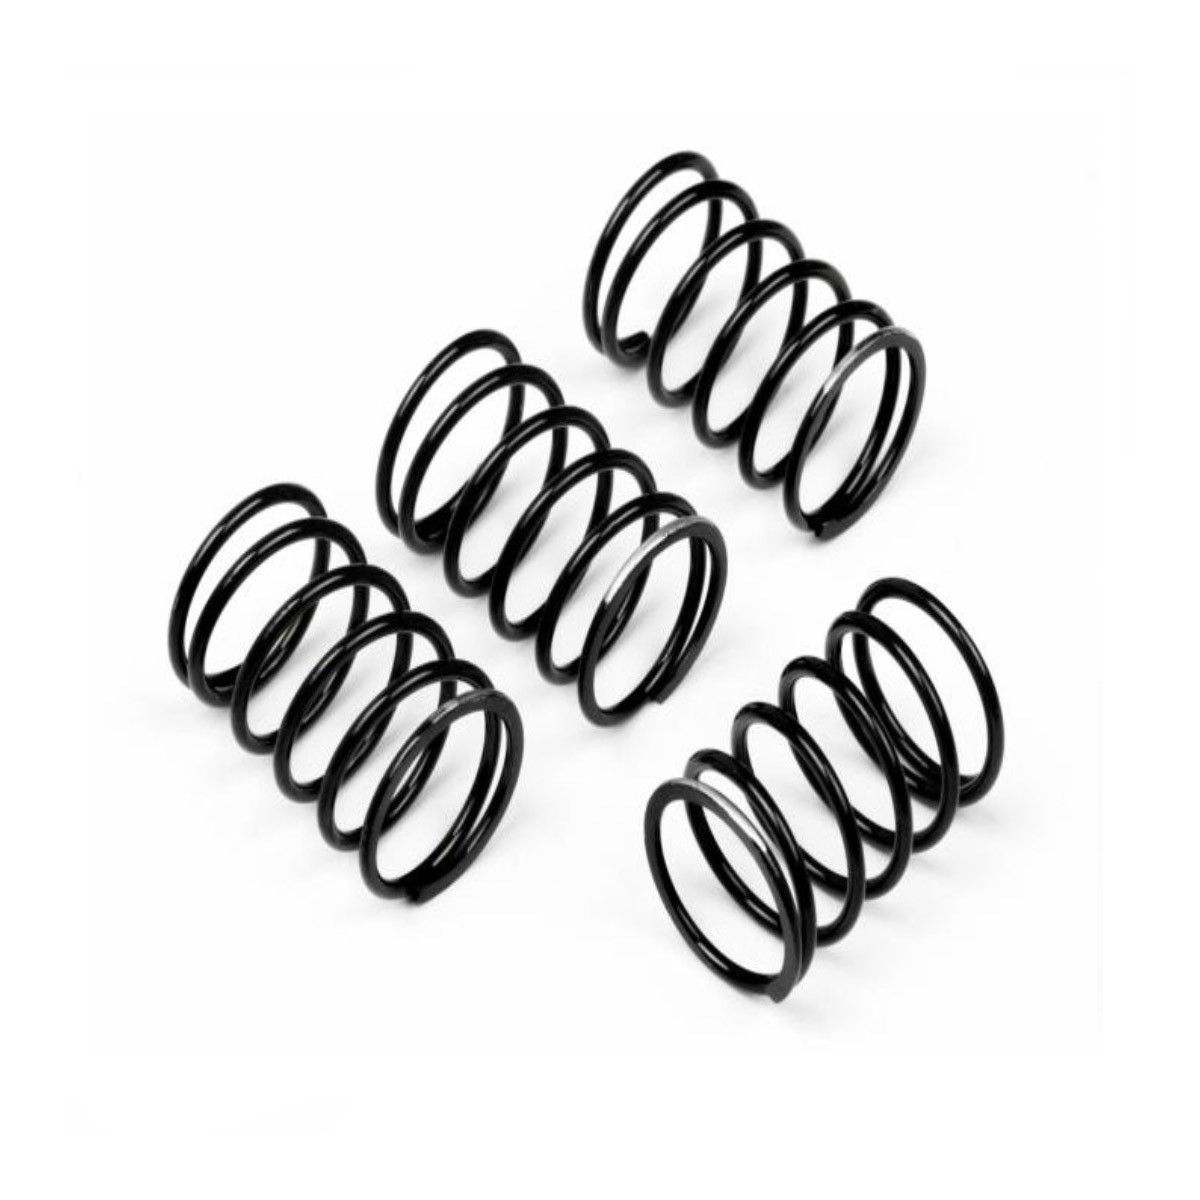  Replacement springs (factory height) for Toyota Rav 4 Kayaba (2006-2014) Image 1